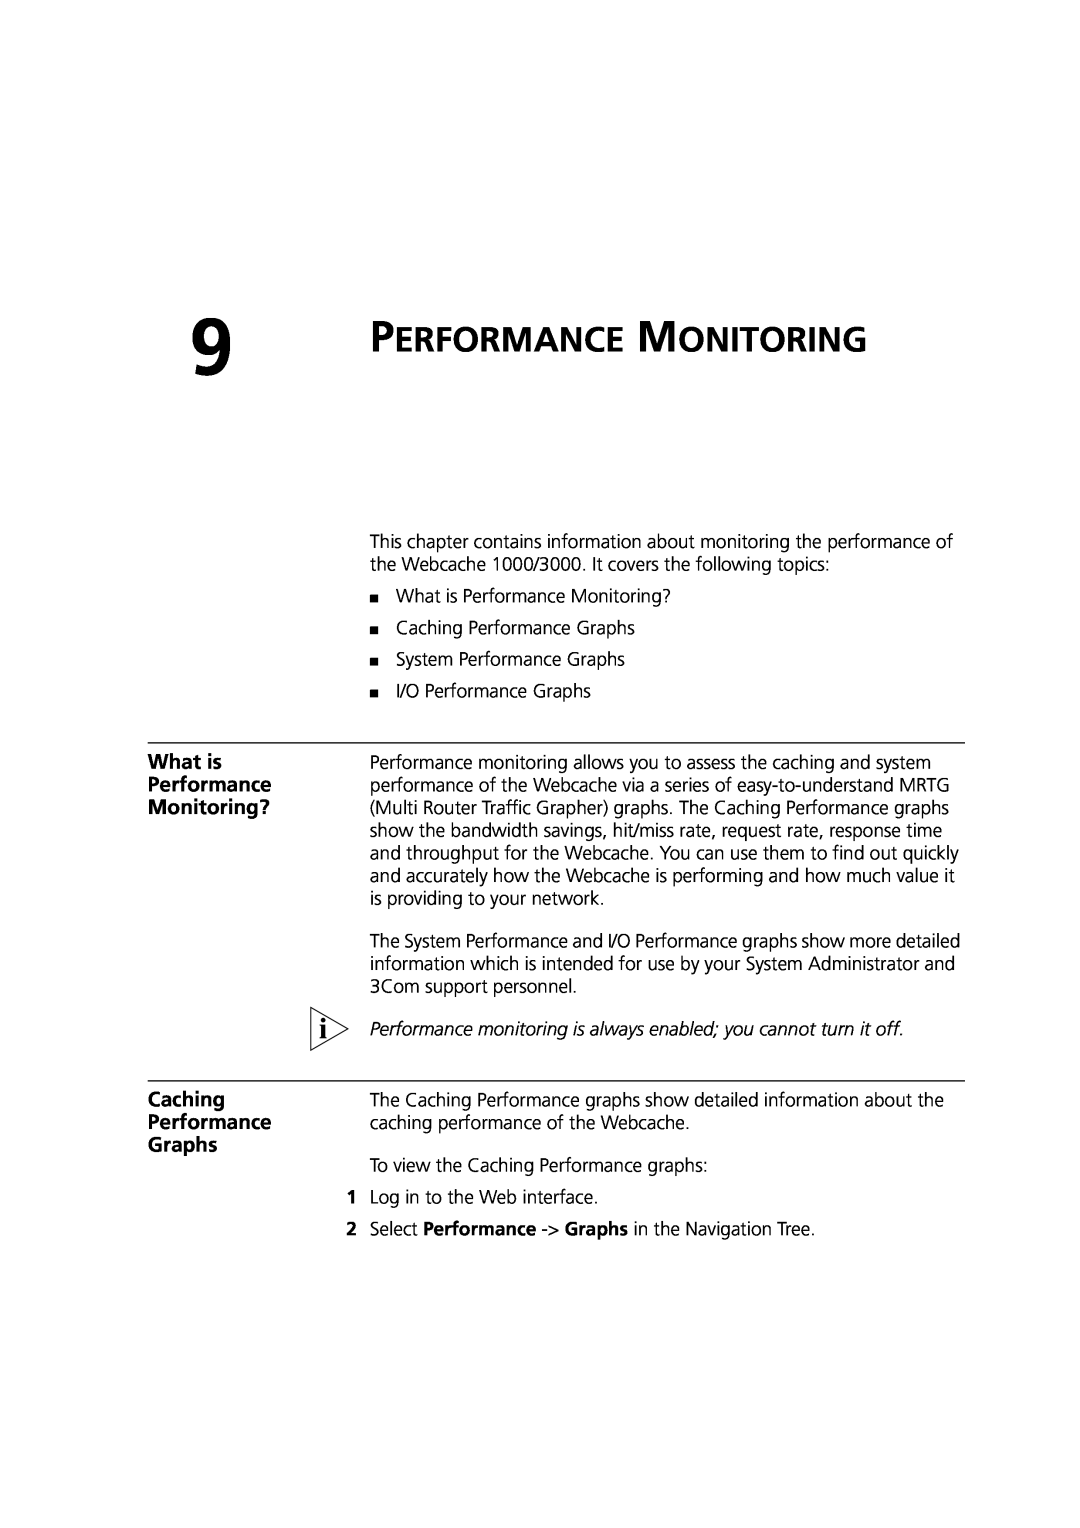 3Com Webcache 3000 (3C16116), Webcache 1000 (3C16115) manual Performance Monitoring, What is, Monitoring?, Caching, Graphs 